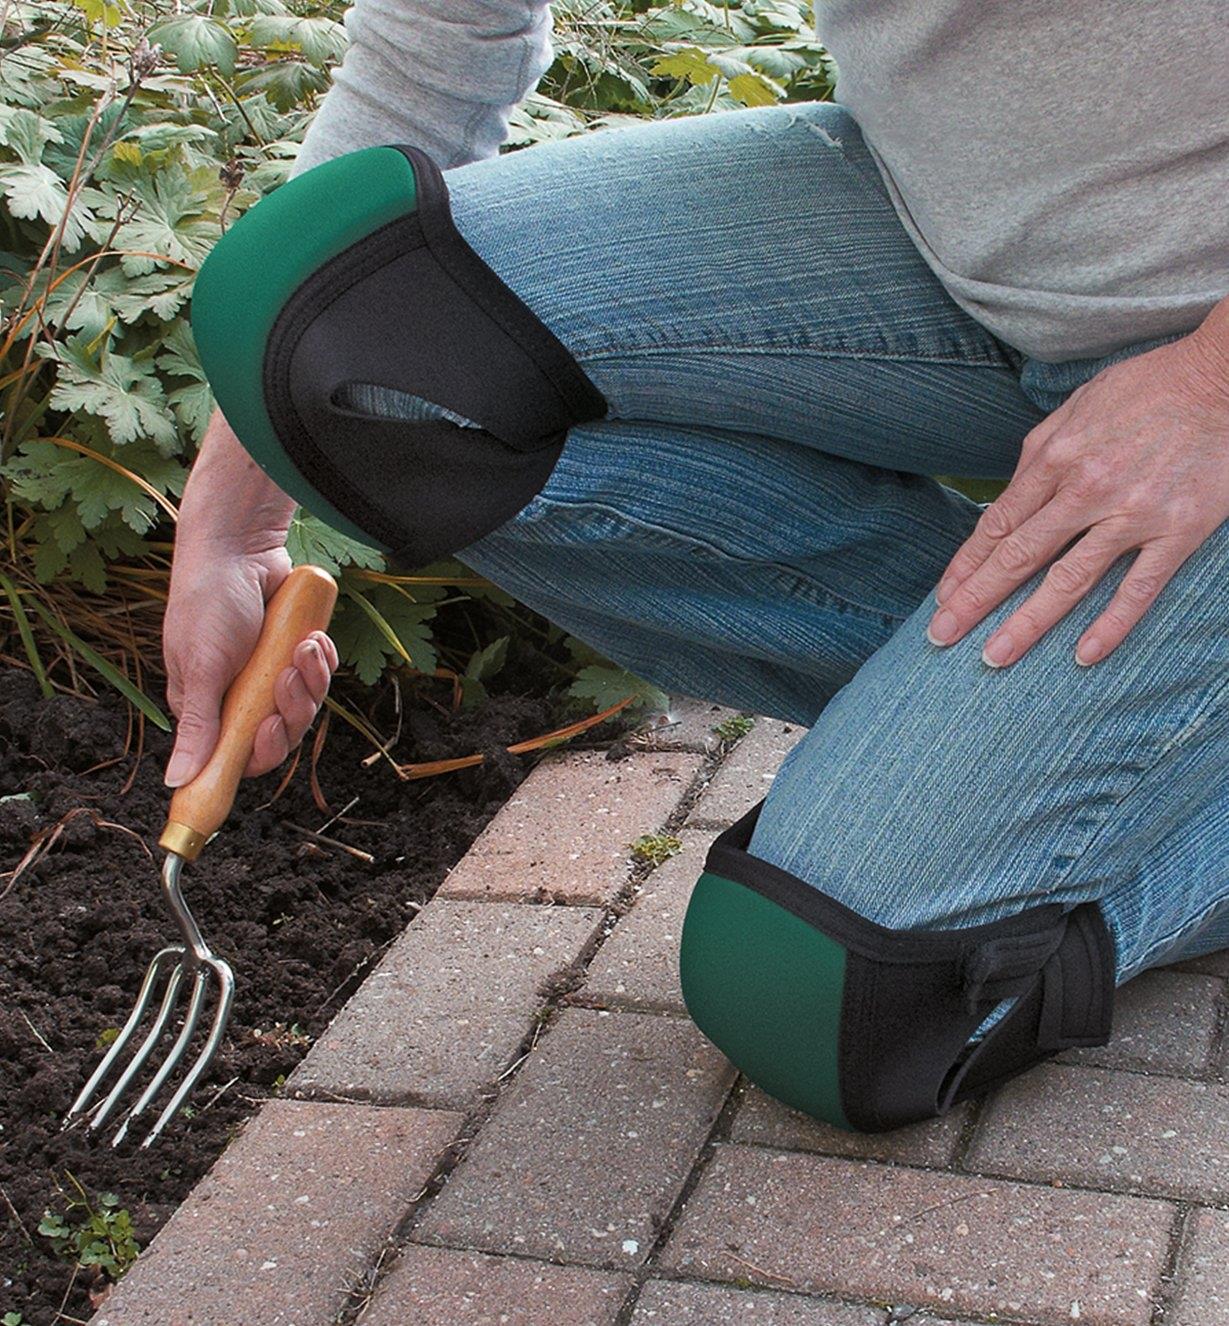 A woman wearing Contoured Knee Pads while gardening